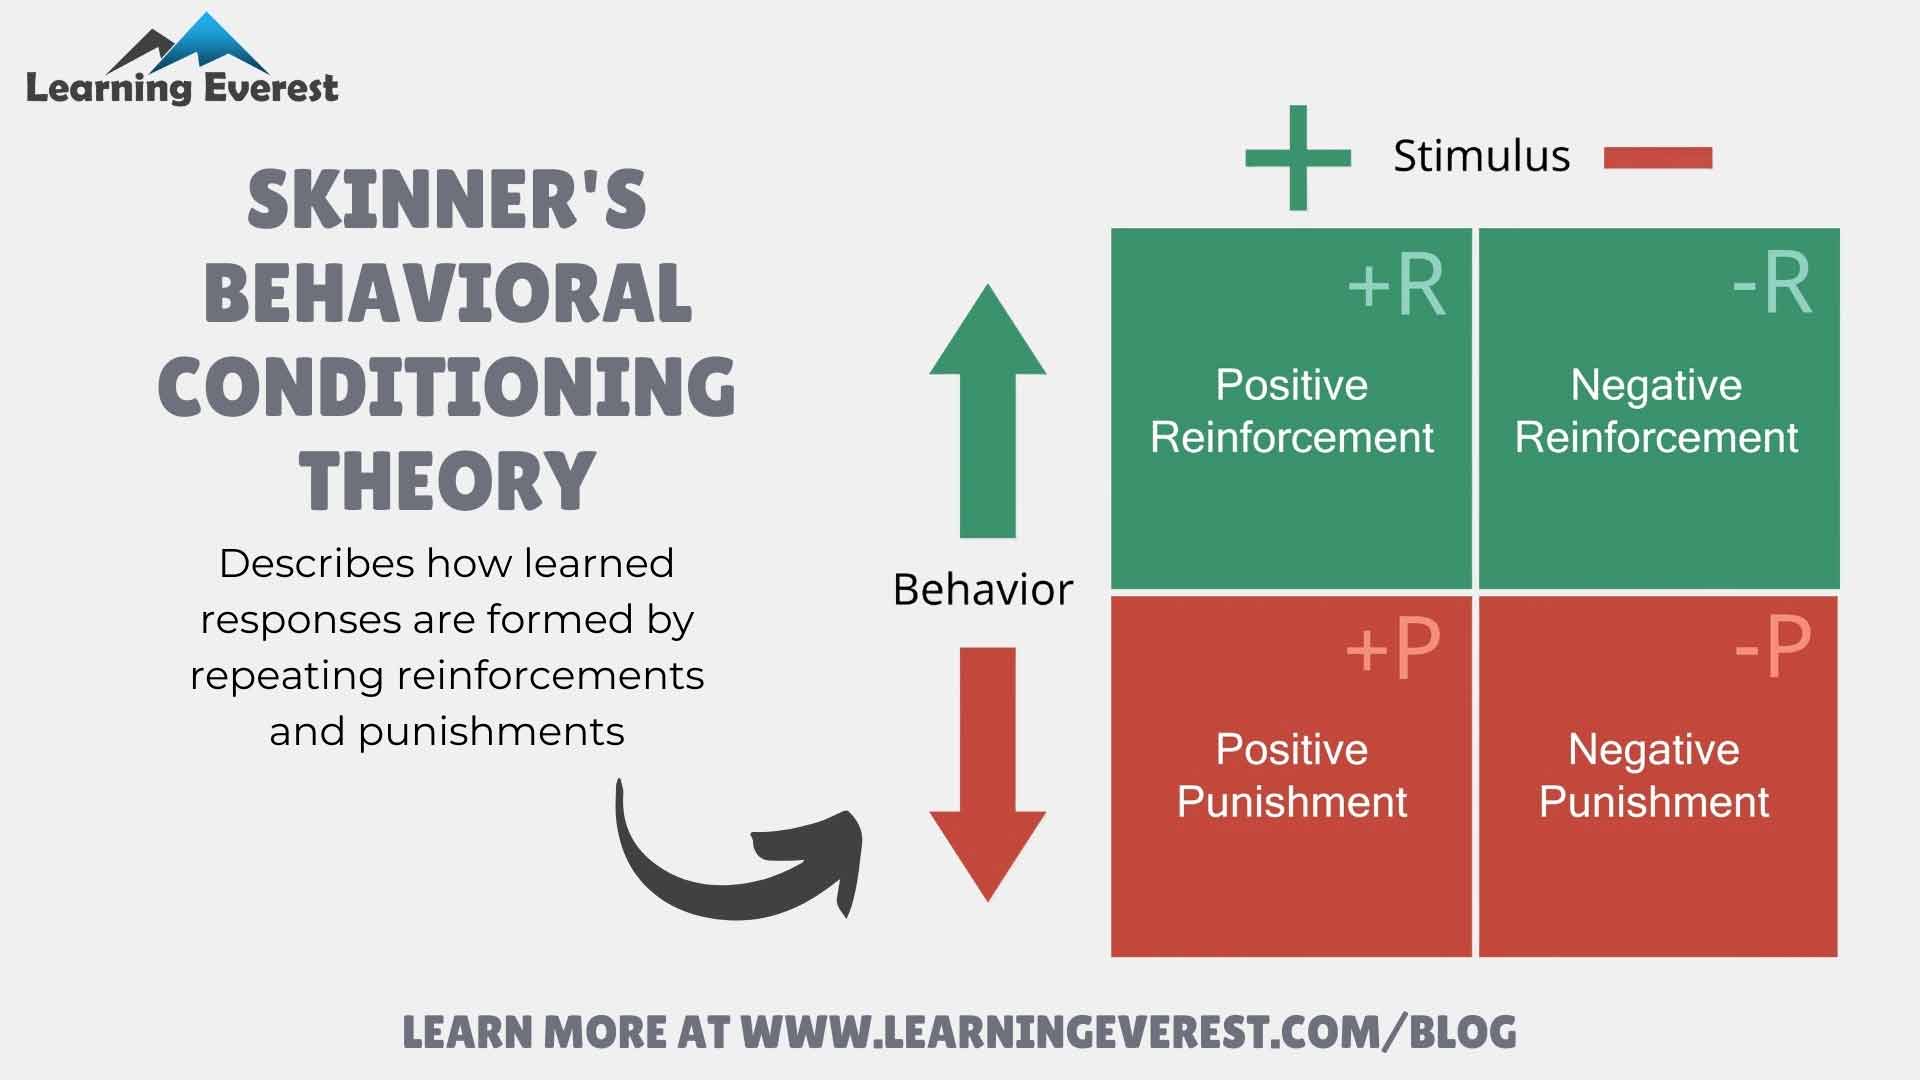 Skinner's Behavioral Conditioning Theory